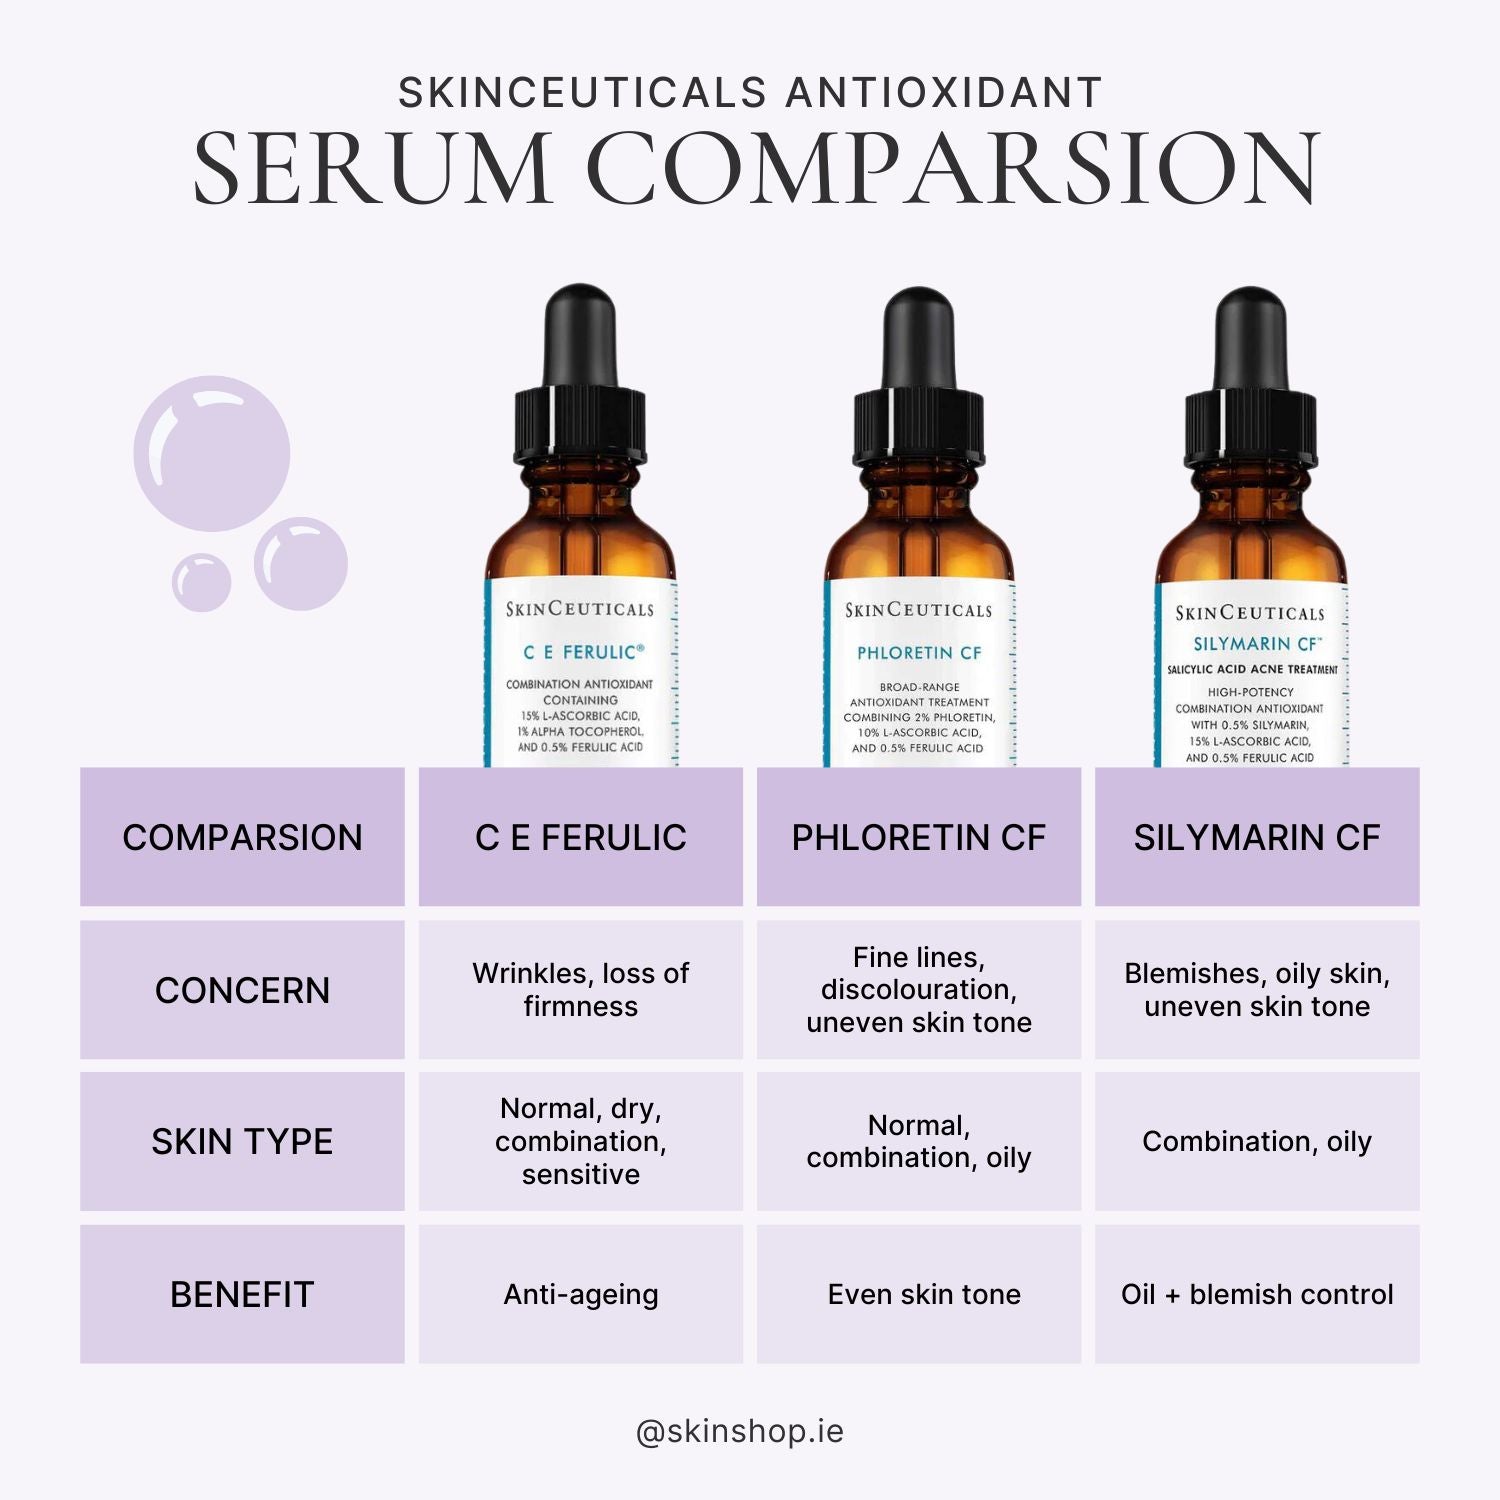 SkinCeuticals Antioxidants Compared